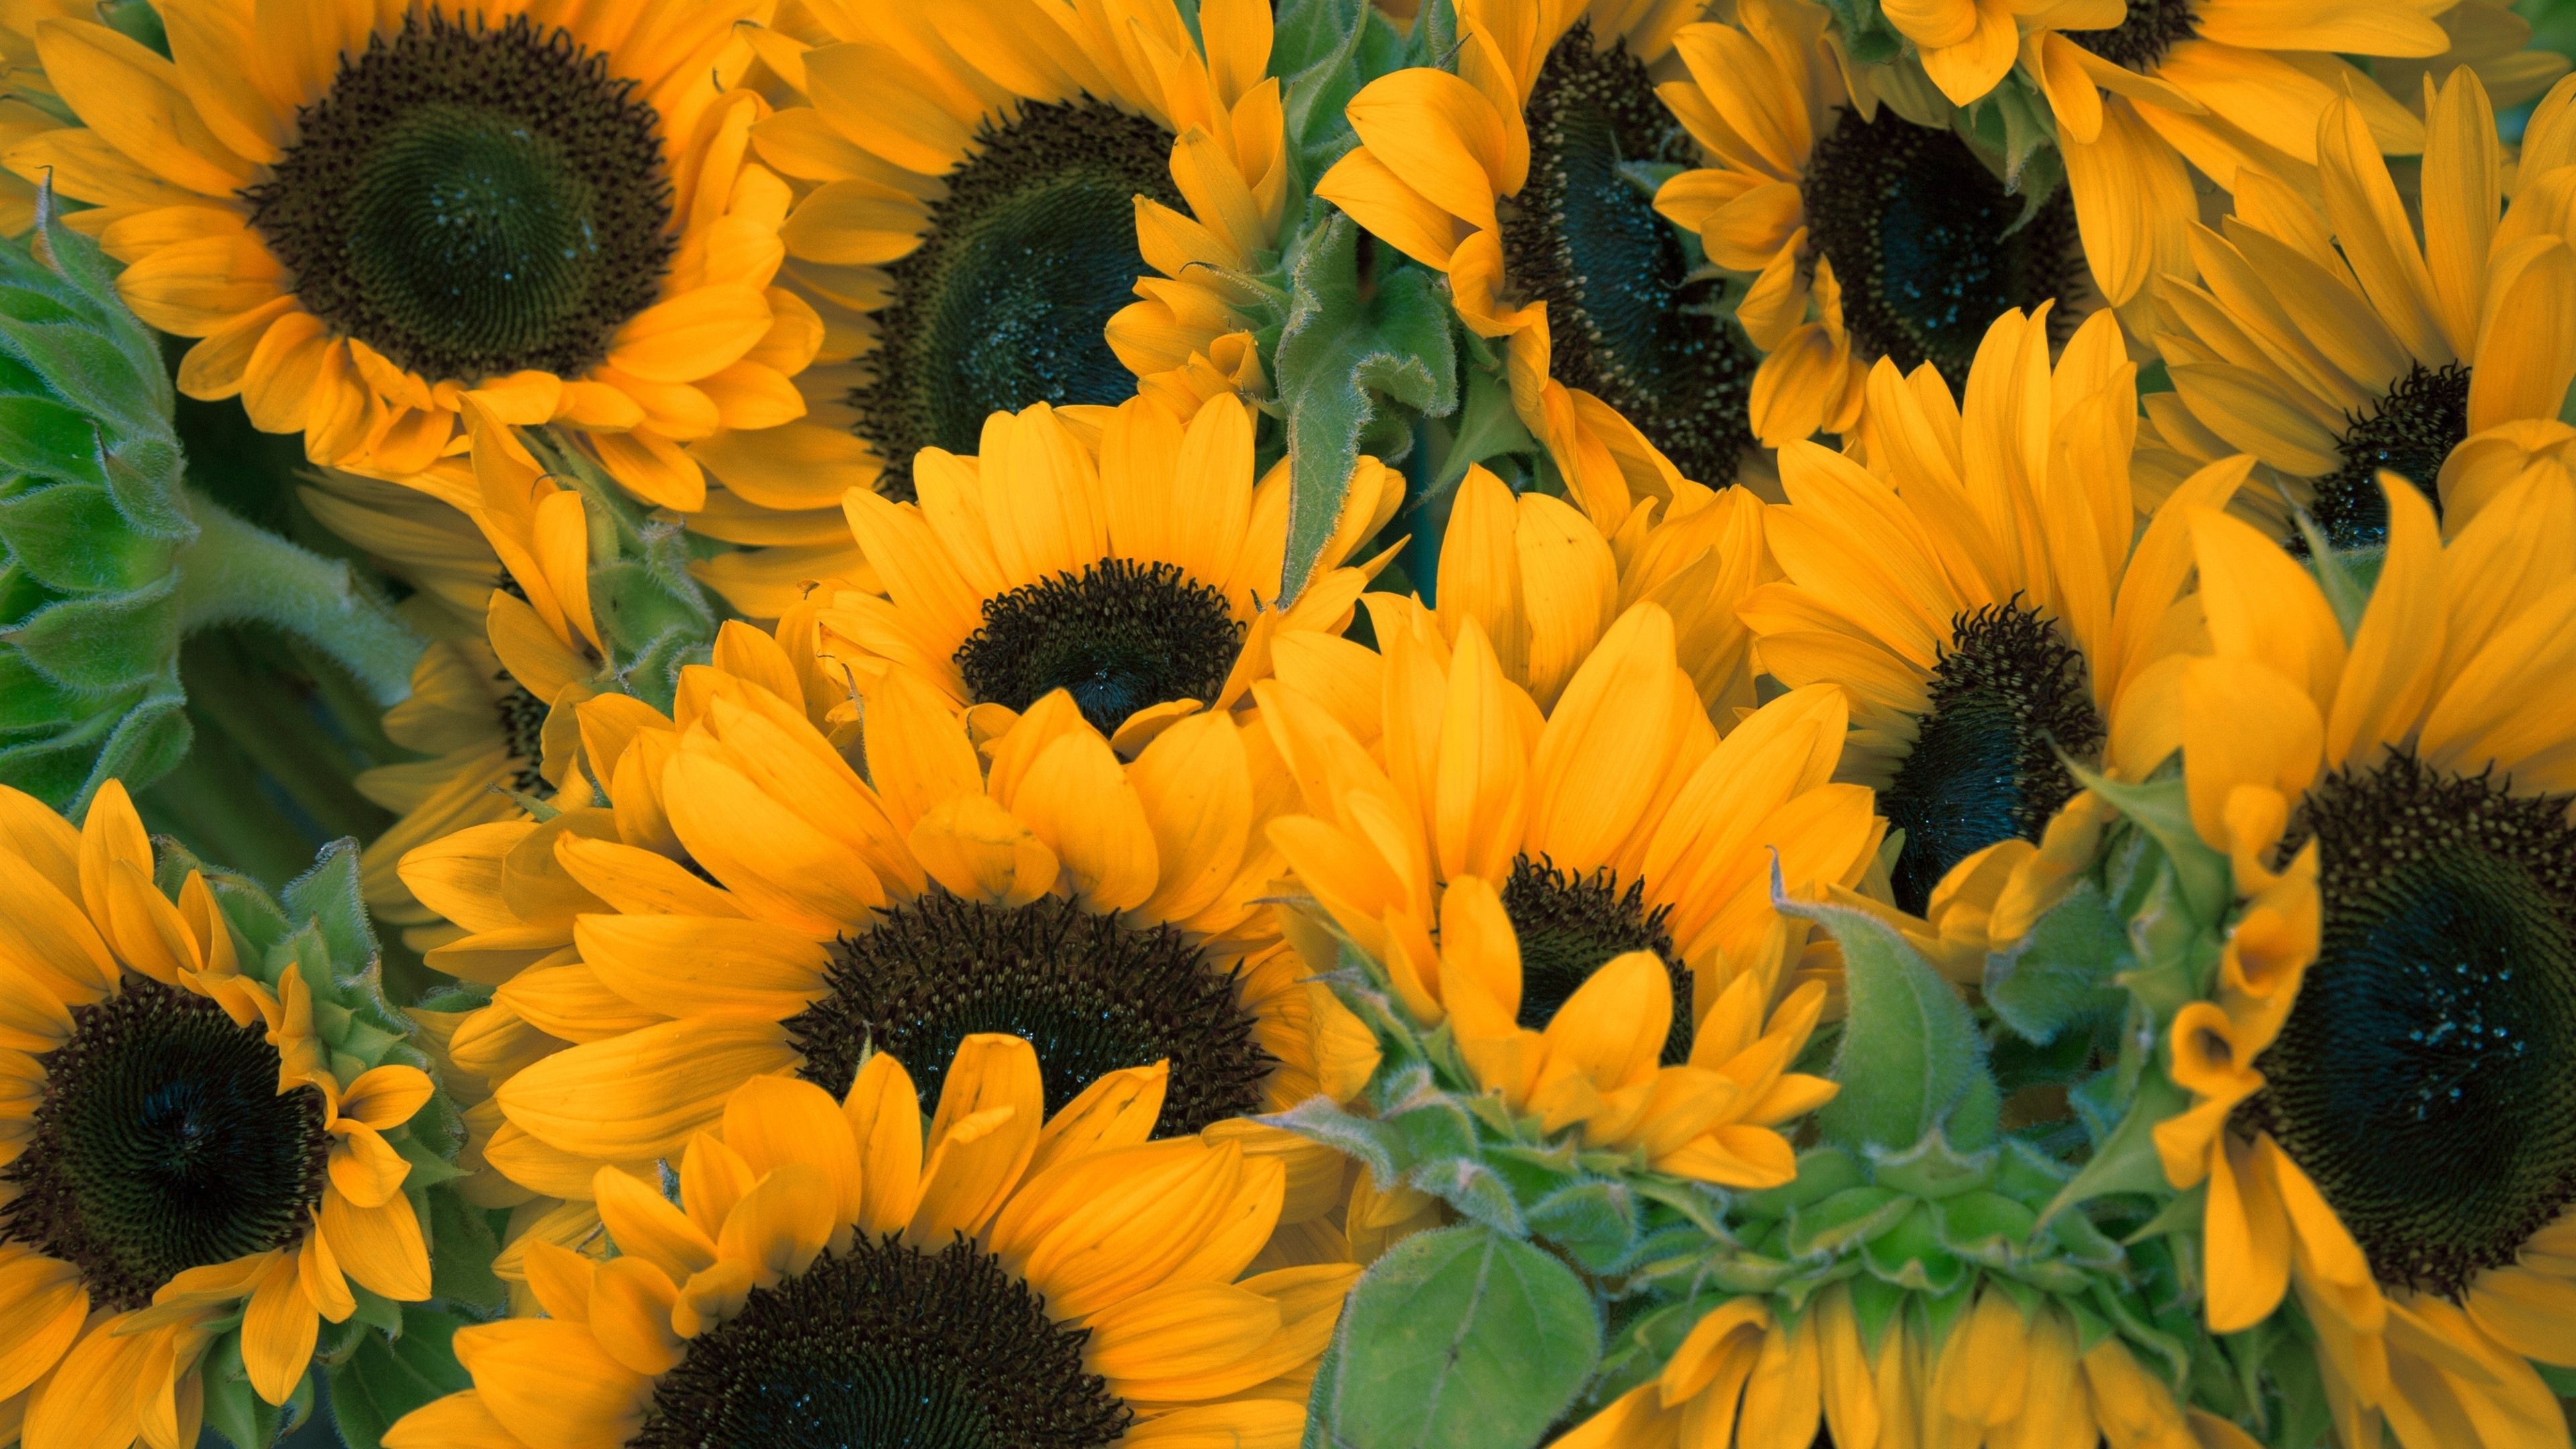 Wallpaper Sunflowers, yellow flowers, summer 3840x2160 UHD 4K Picture, Image